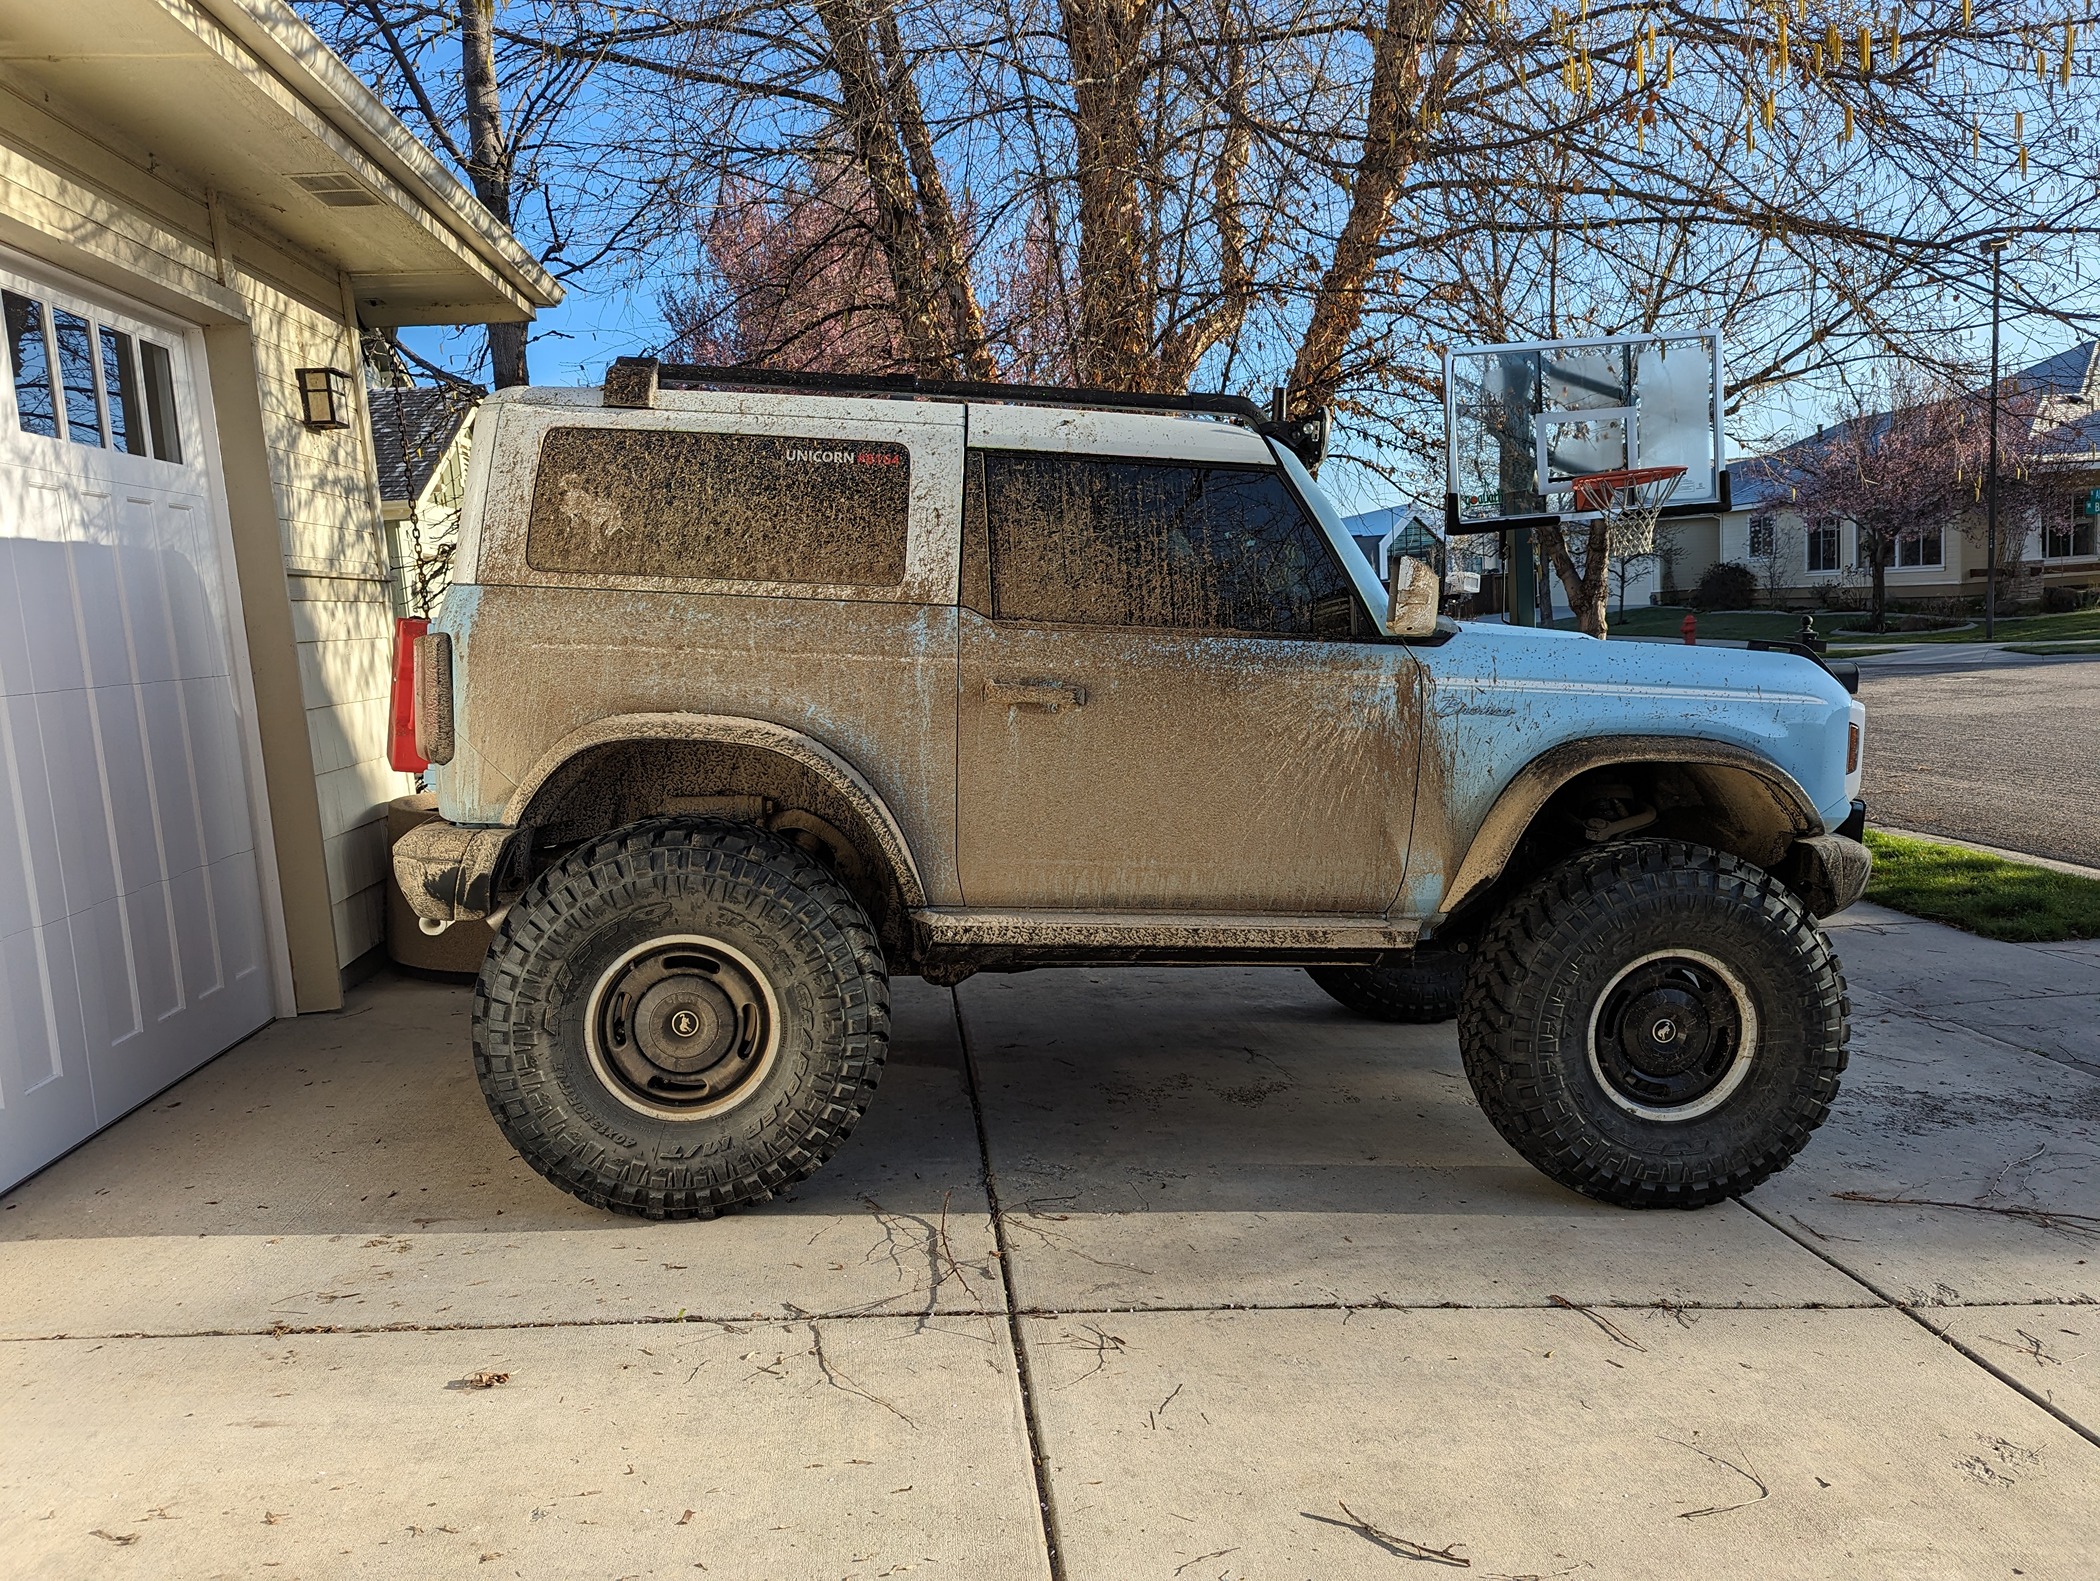 Ford Bronco Portals and Pro-X update Muddy Bronco 2